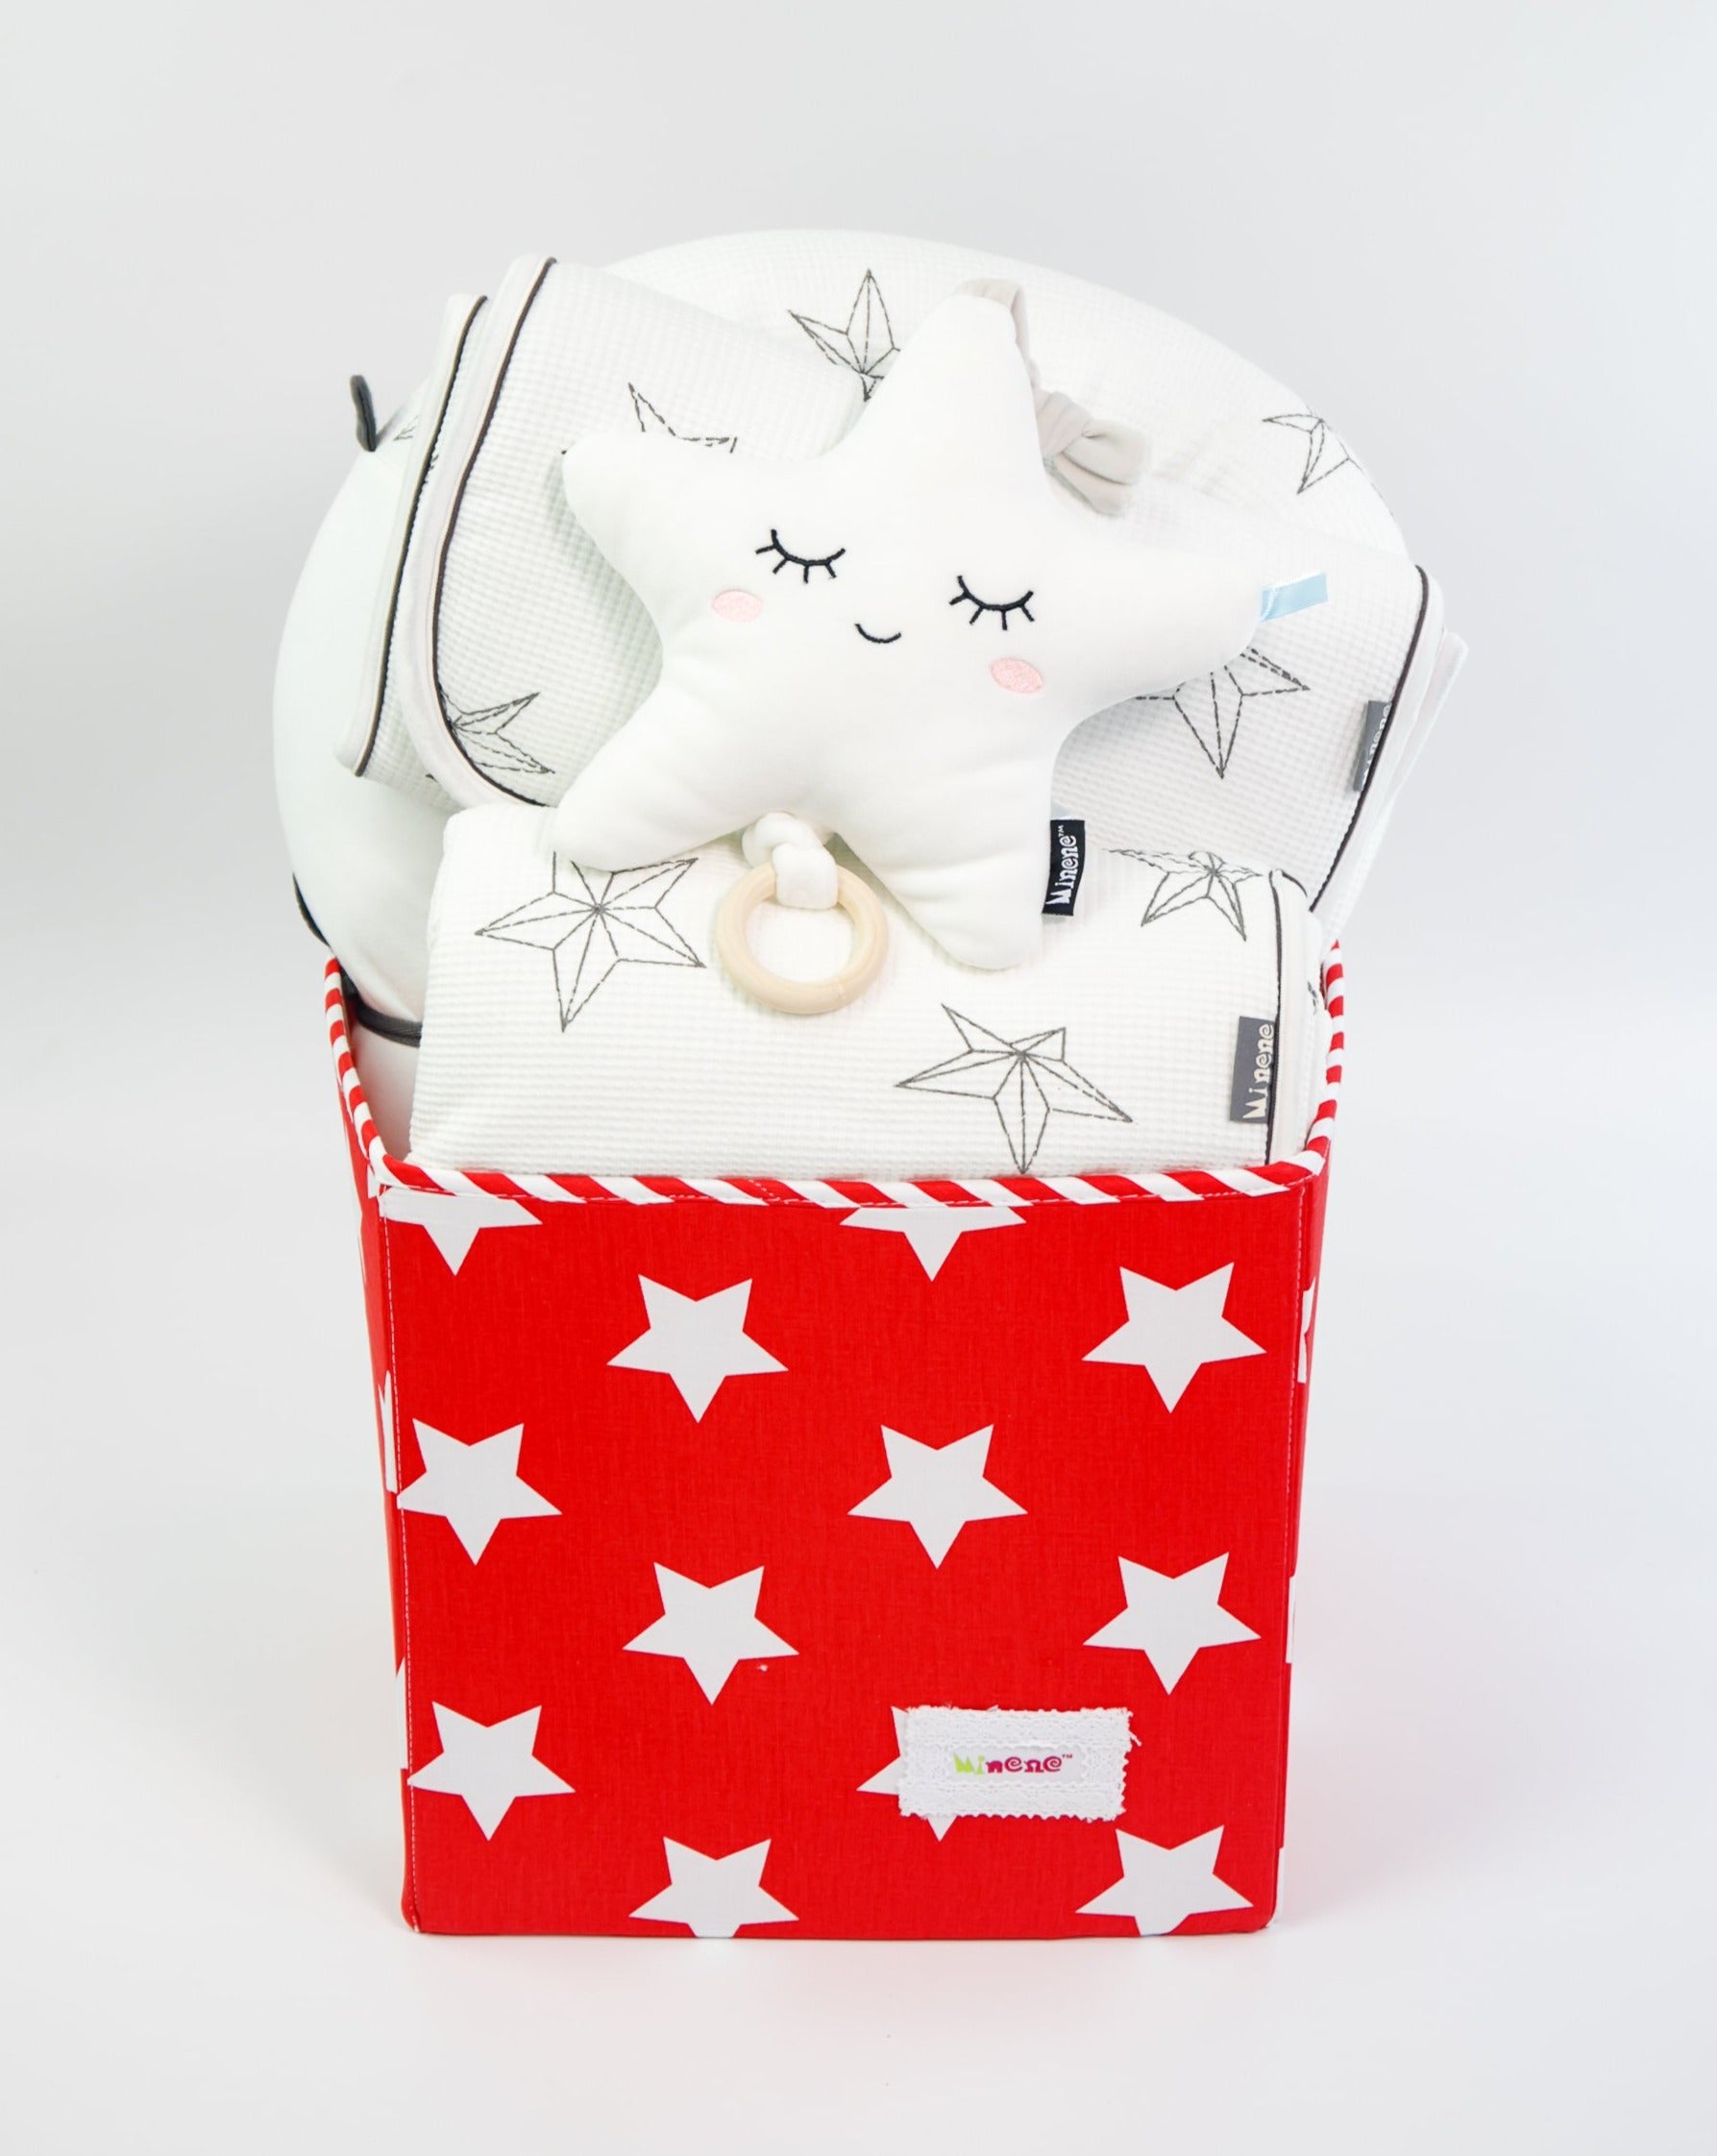 Red Star Gift Box for the little one